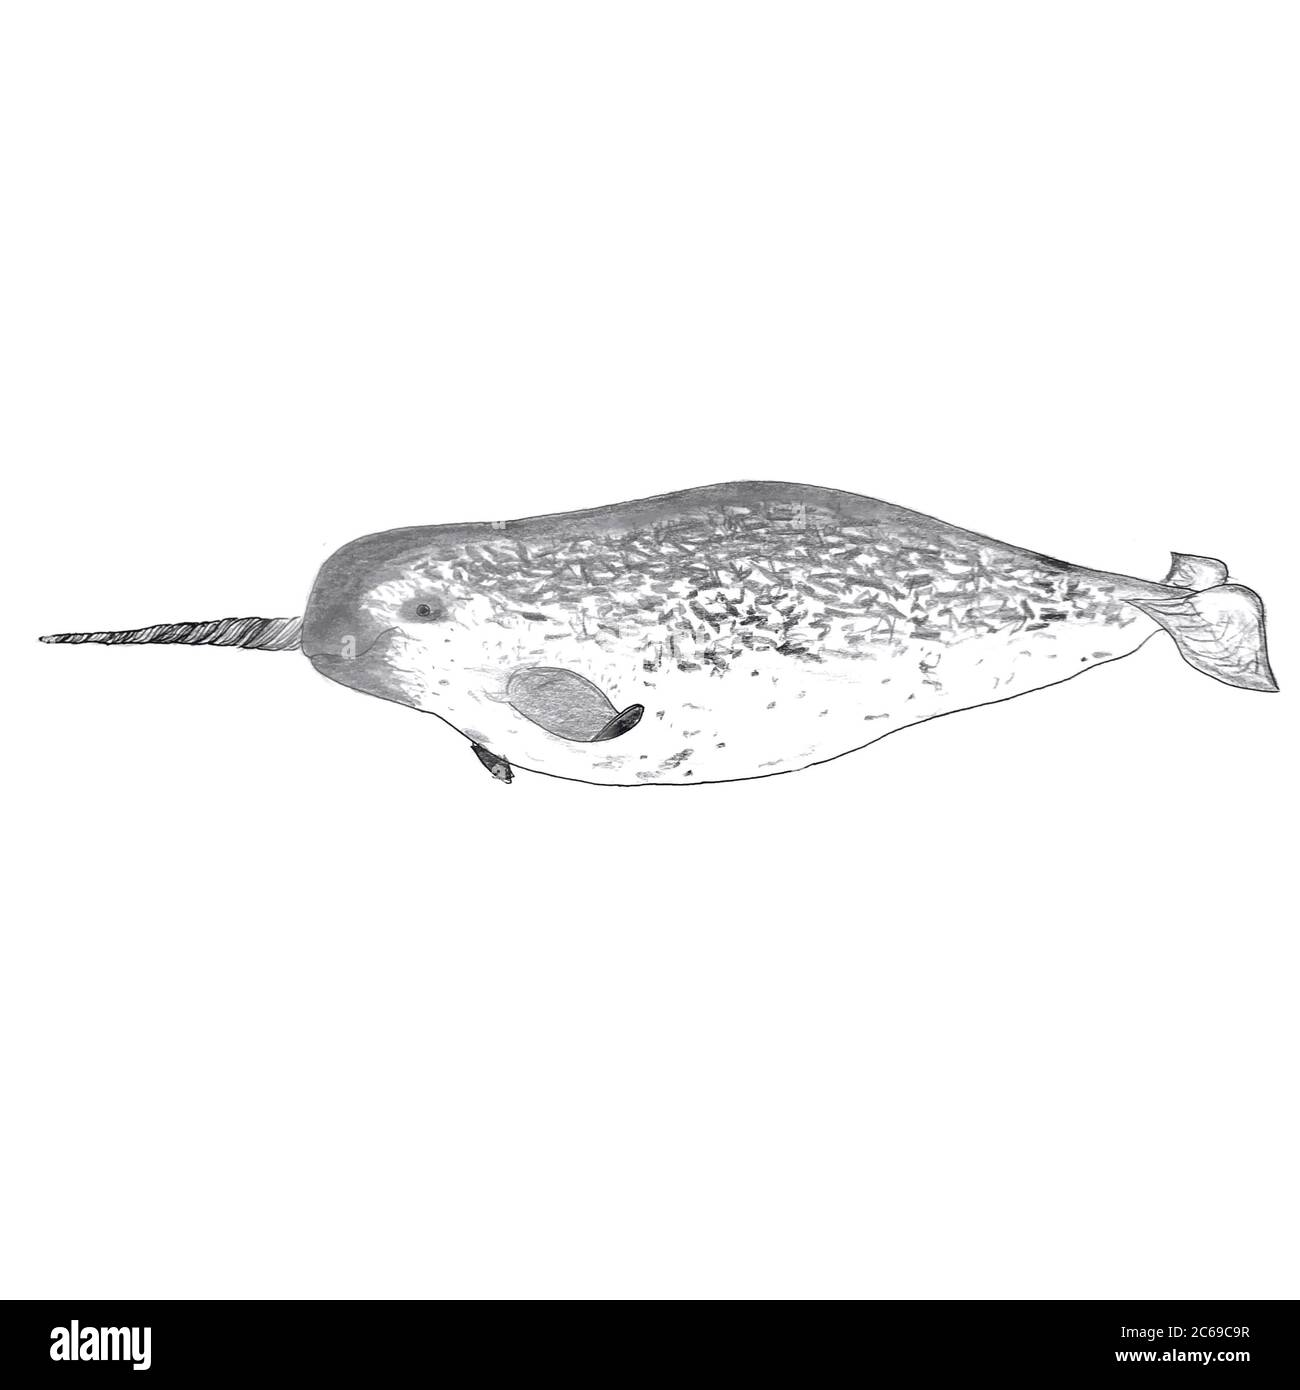 A Drawing of Narwhal (Unicorn whale) Stock Photo